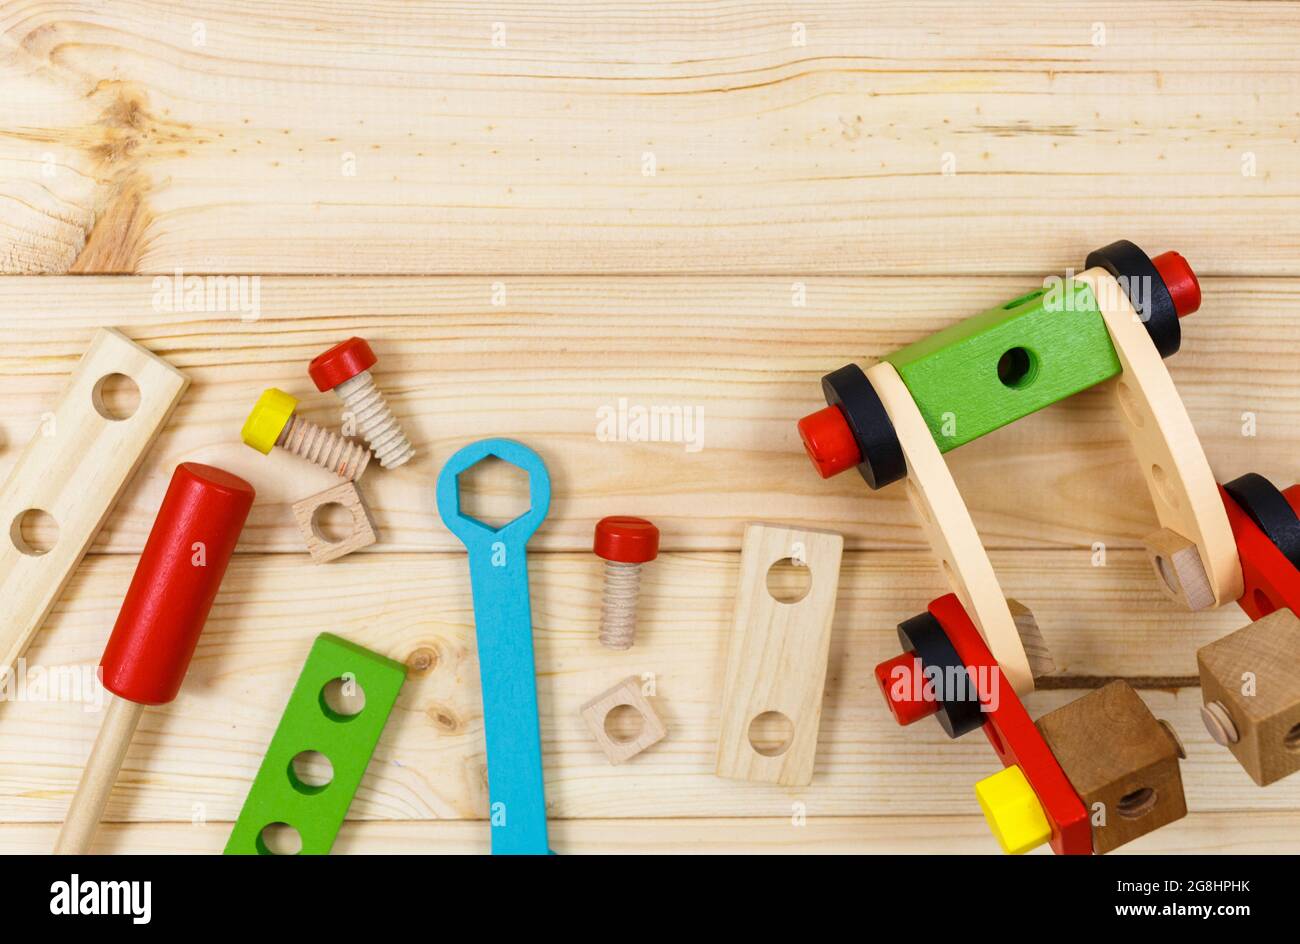 A colorful wooden building kit for children on wood. Set of tools on wooden table. Games and tools for kids in preschool or daycare. Natural, eco-frie Stock Photo